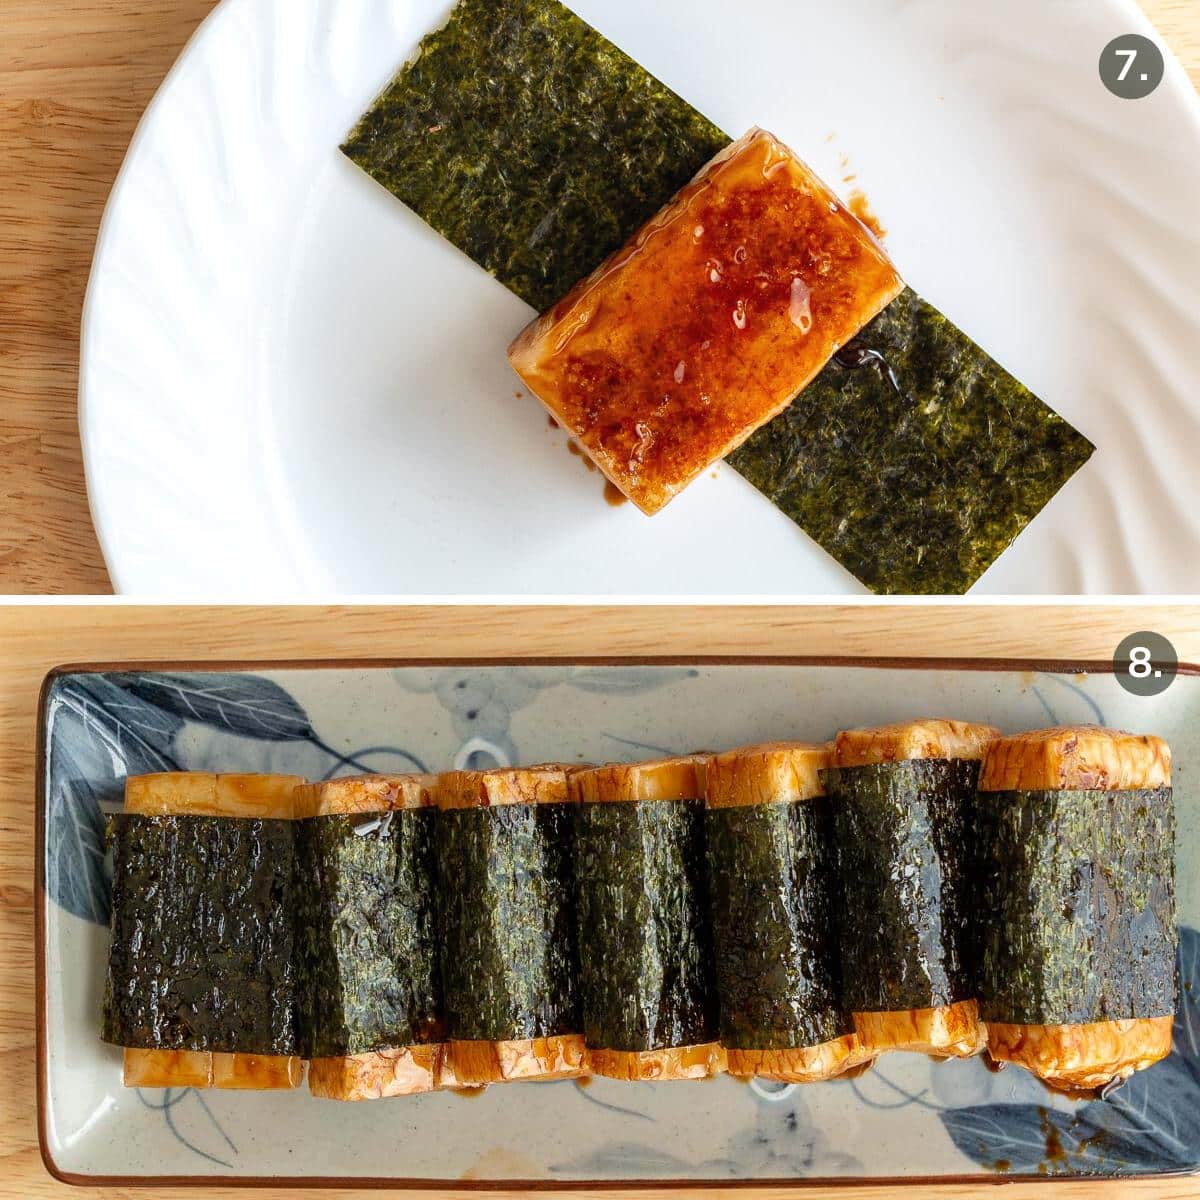 Glazed Japanese rice cakes glazed with sauce and getting rolled in dry roasted seaweed.